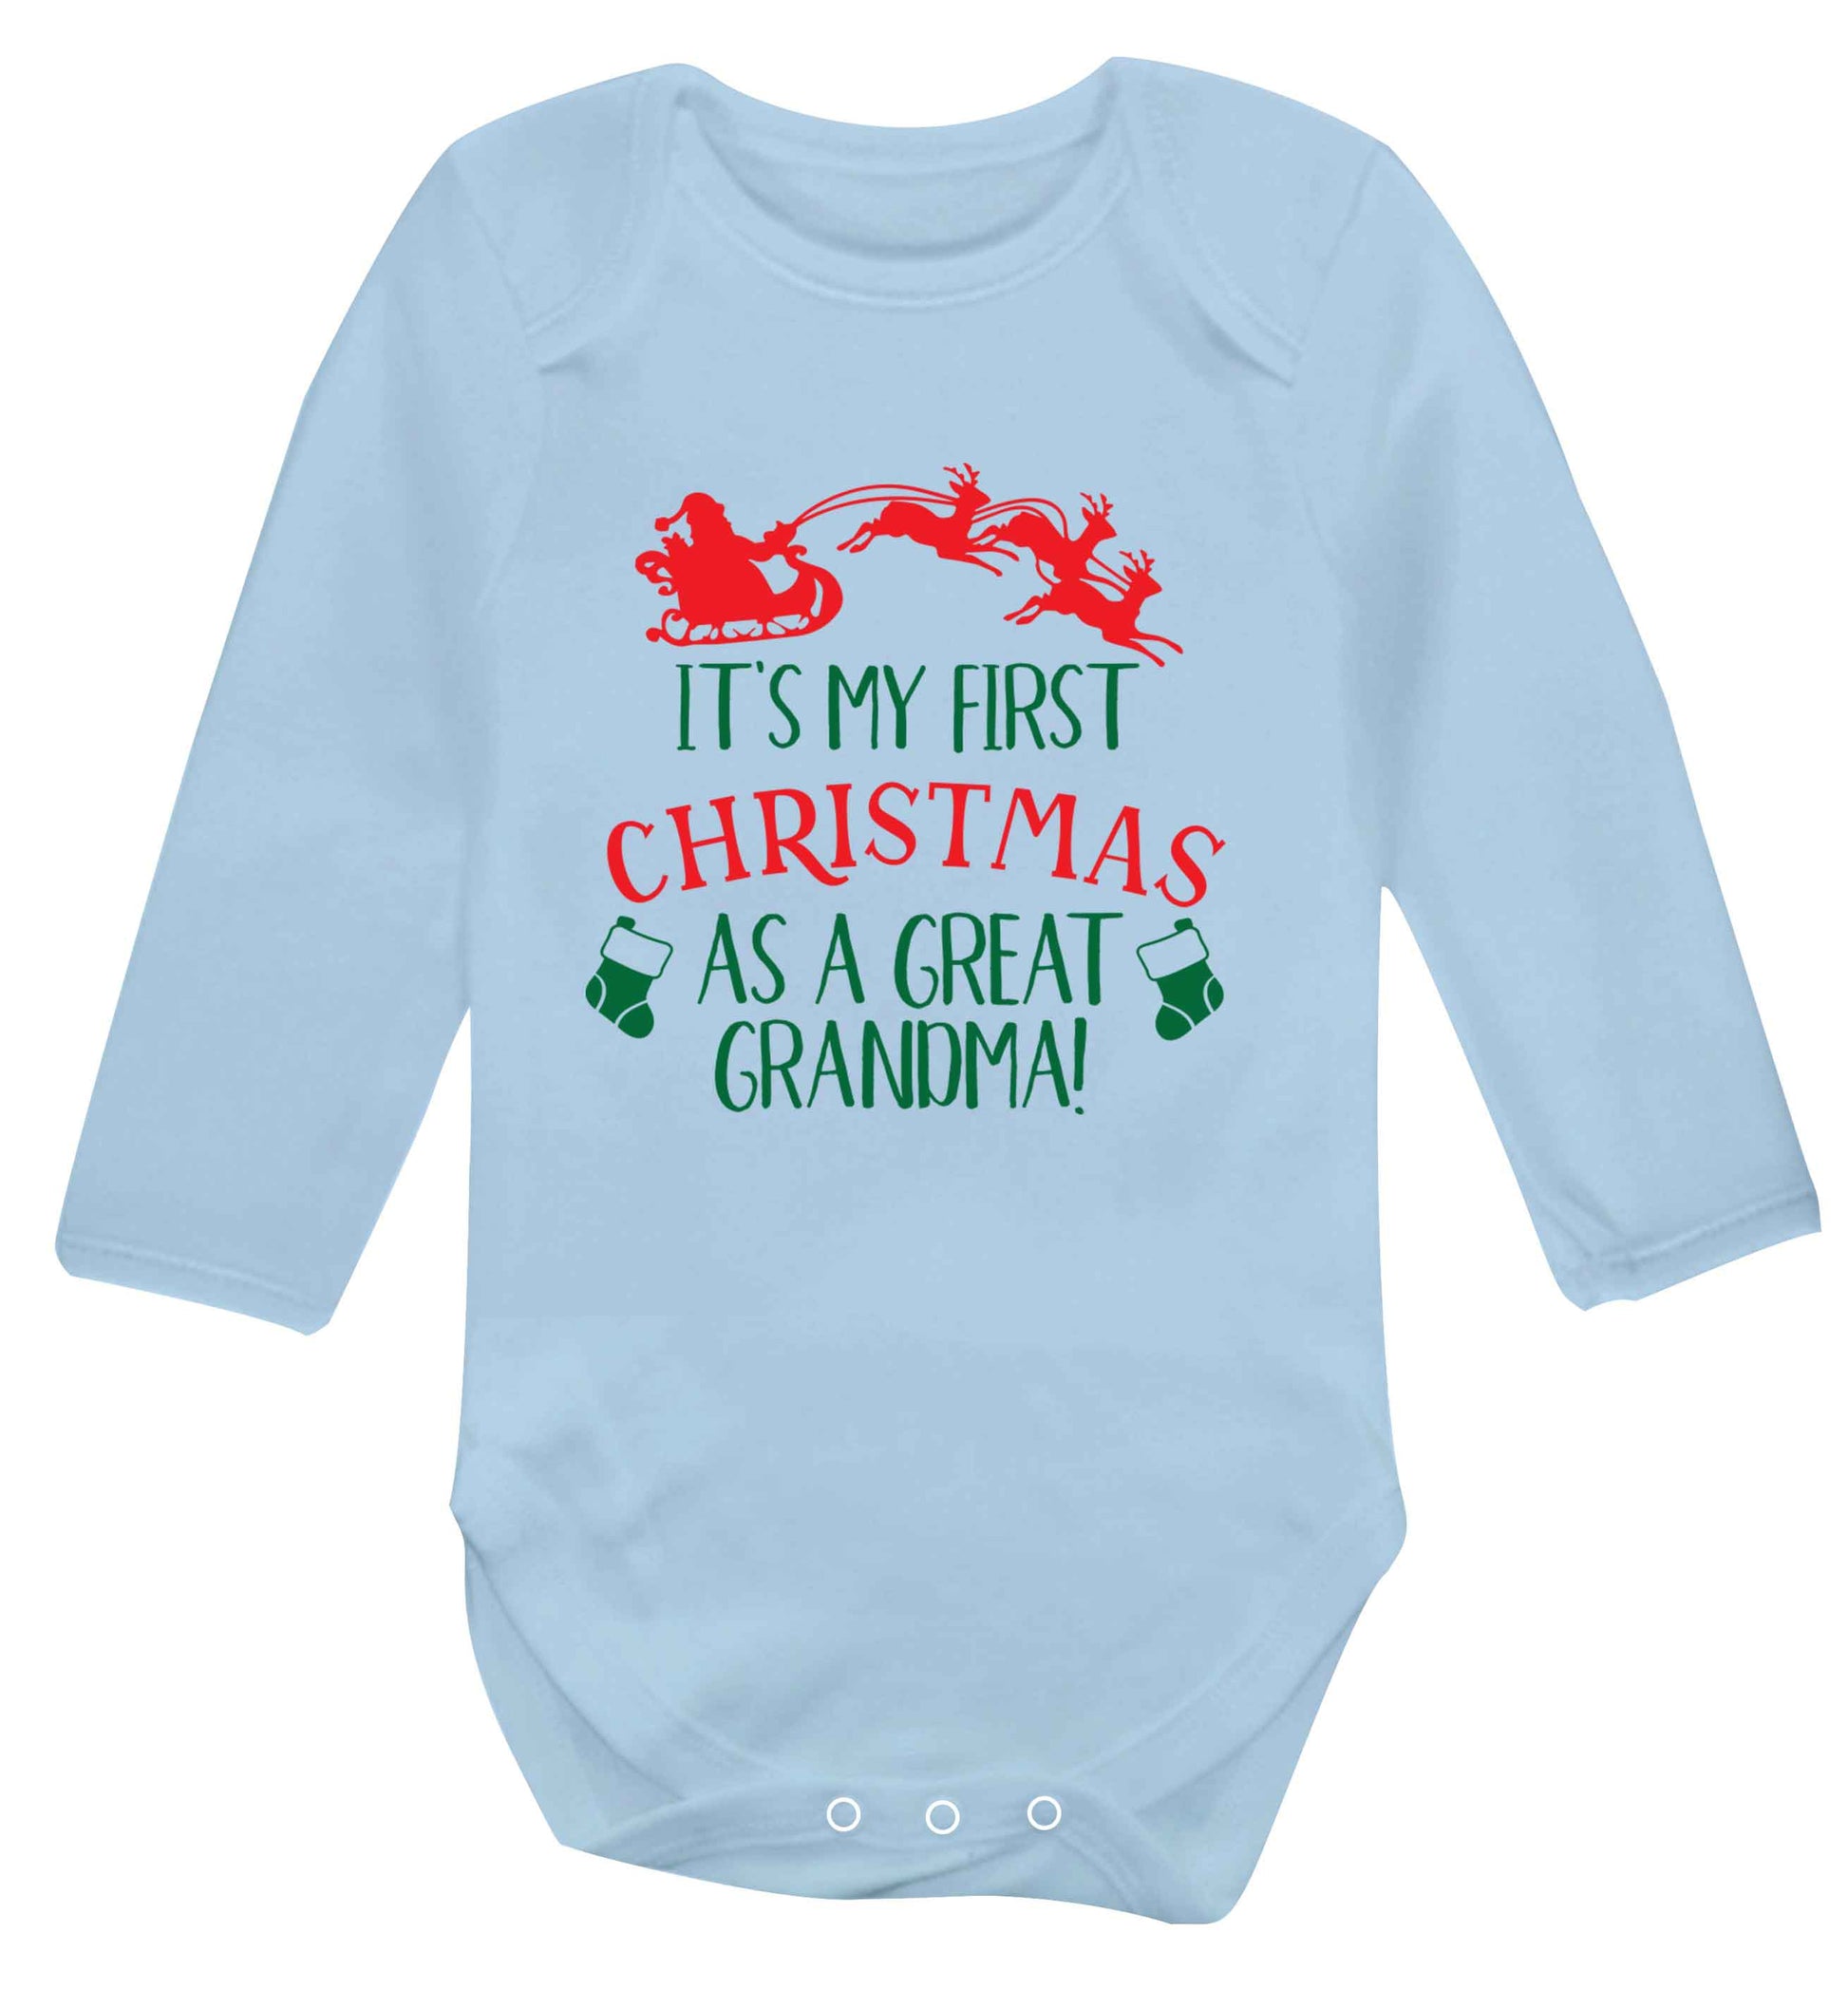 It's my first Christmas as a great grandma! Baby Vest long sleeved pale blue 6-12 months